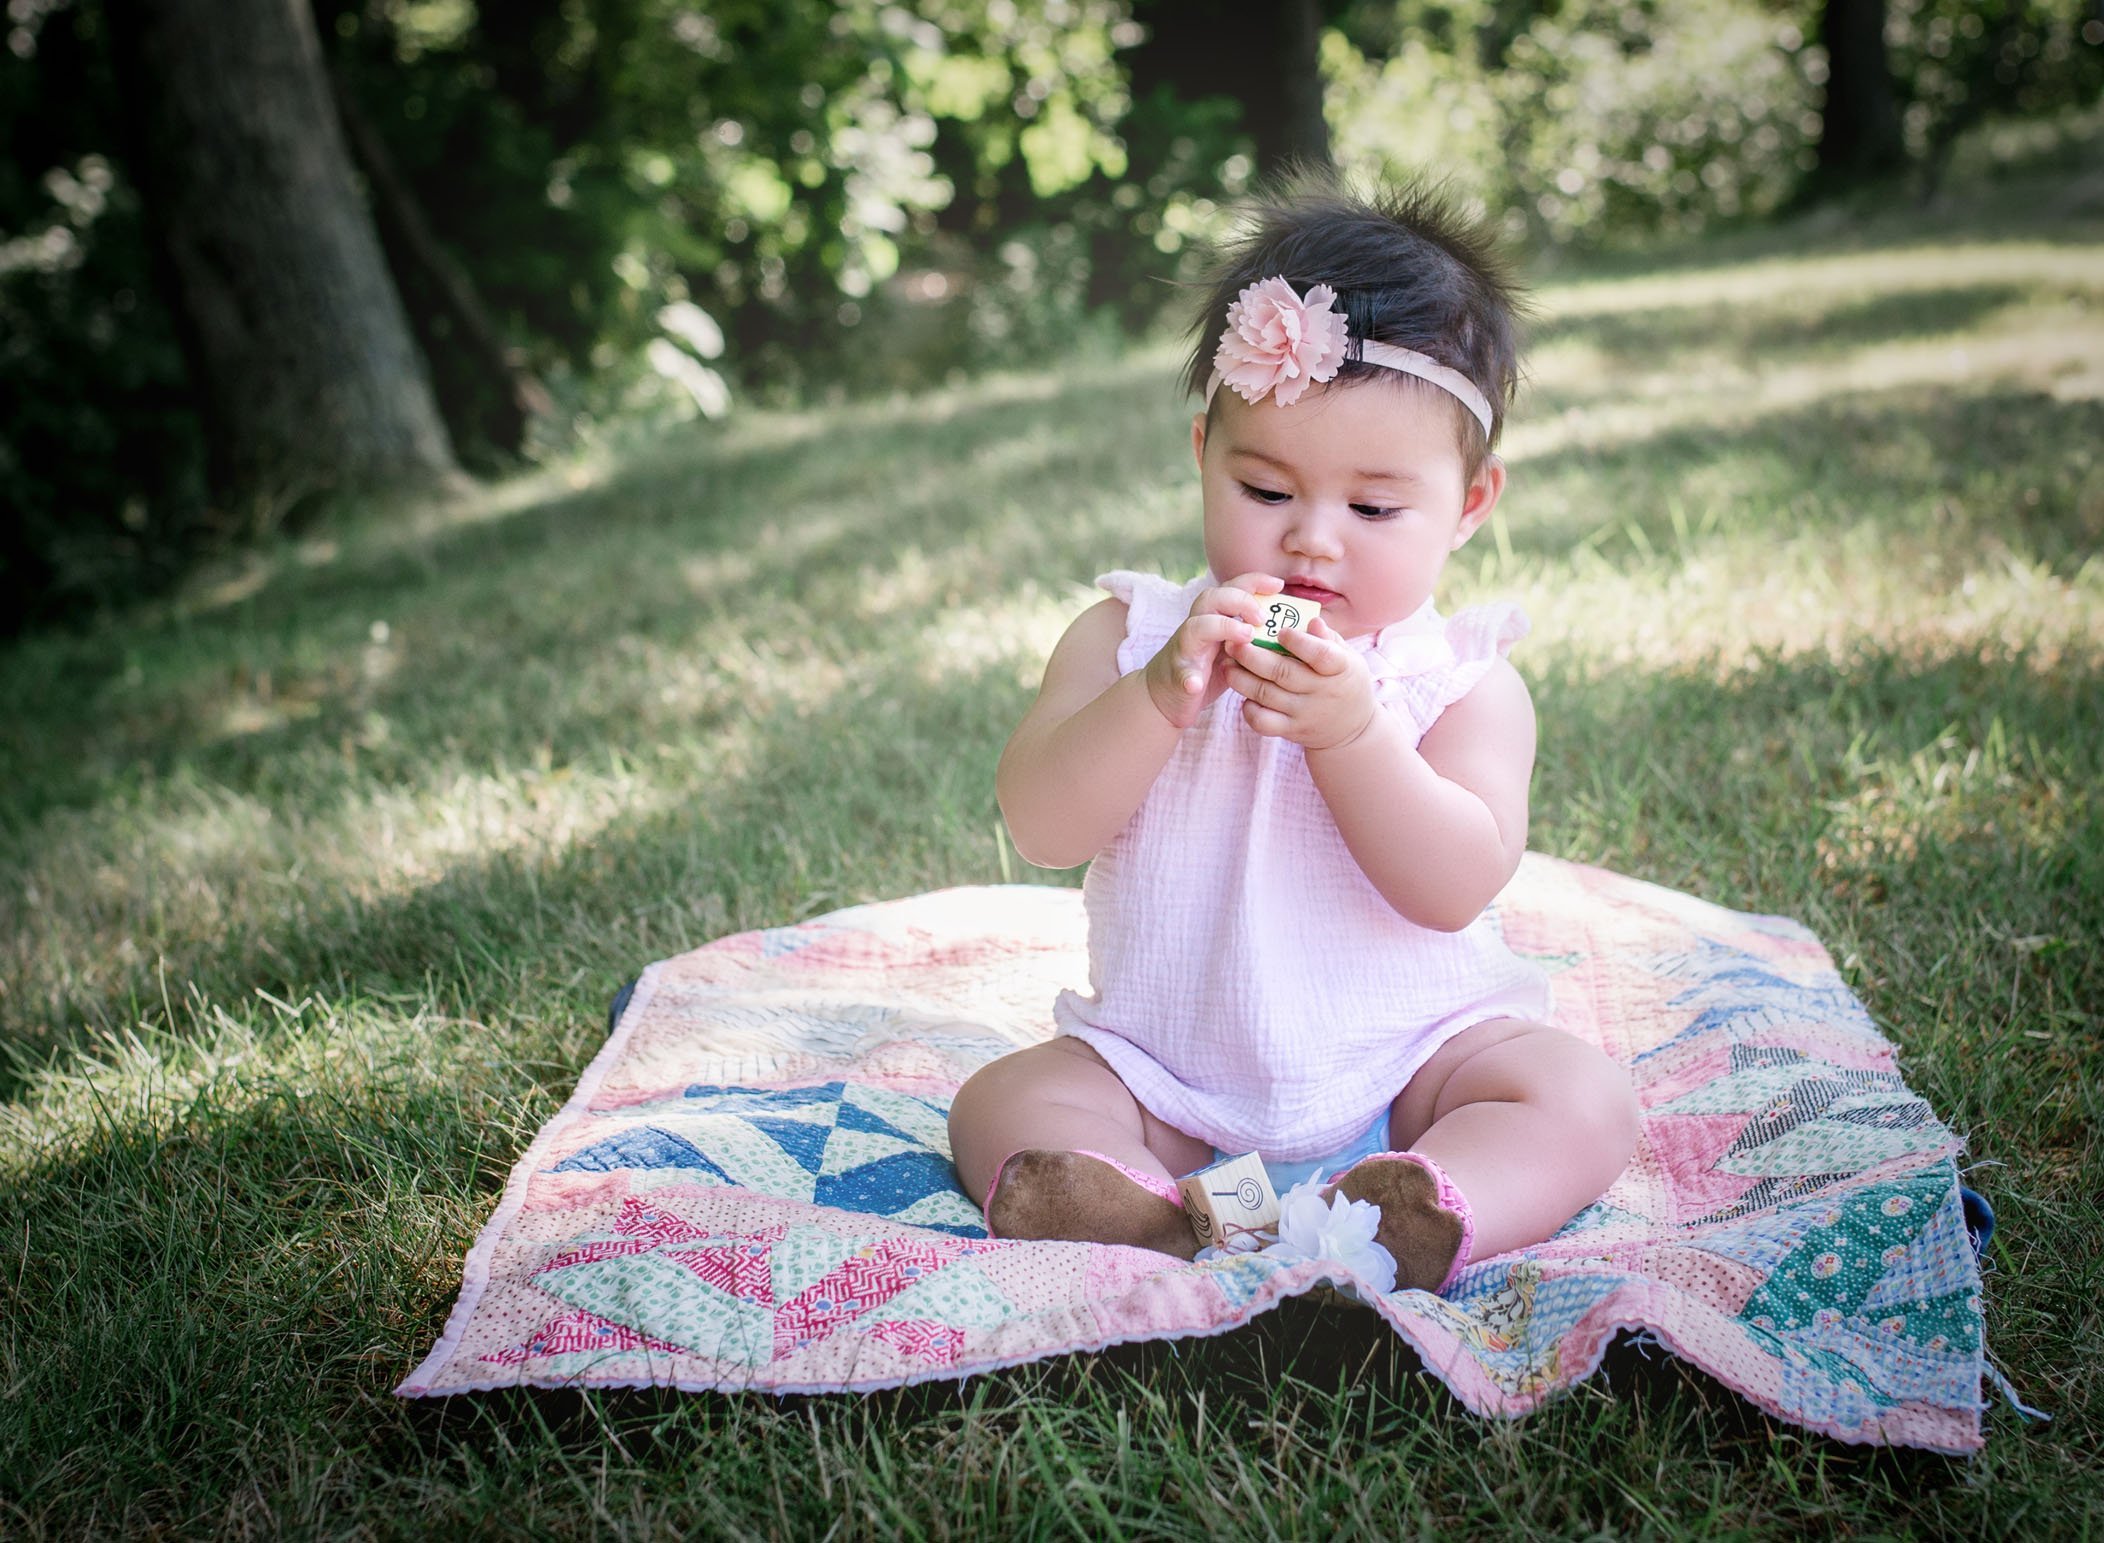 6 month old baby girl sitting on a blanket in the grass looking at a block in her hand